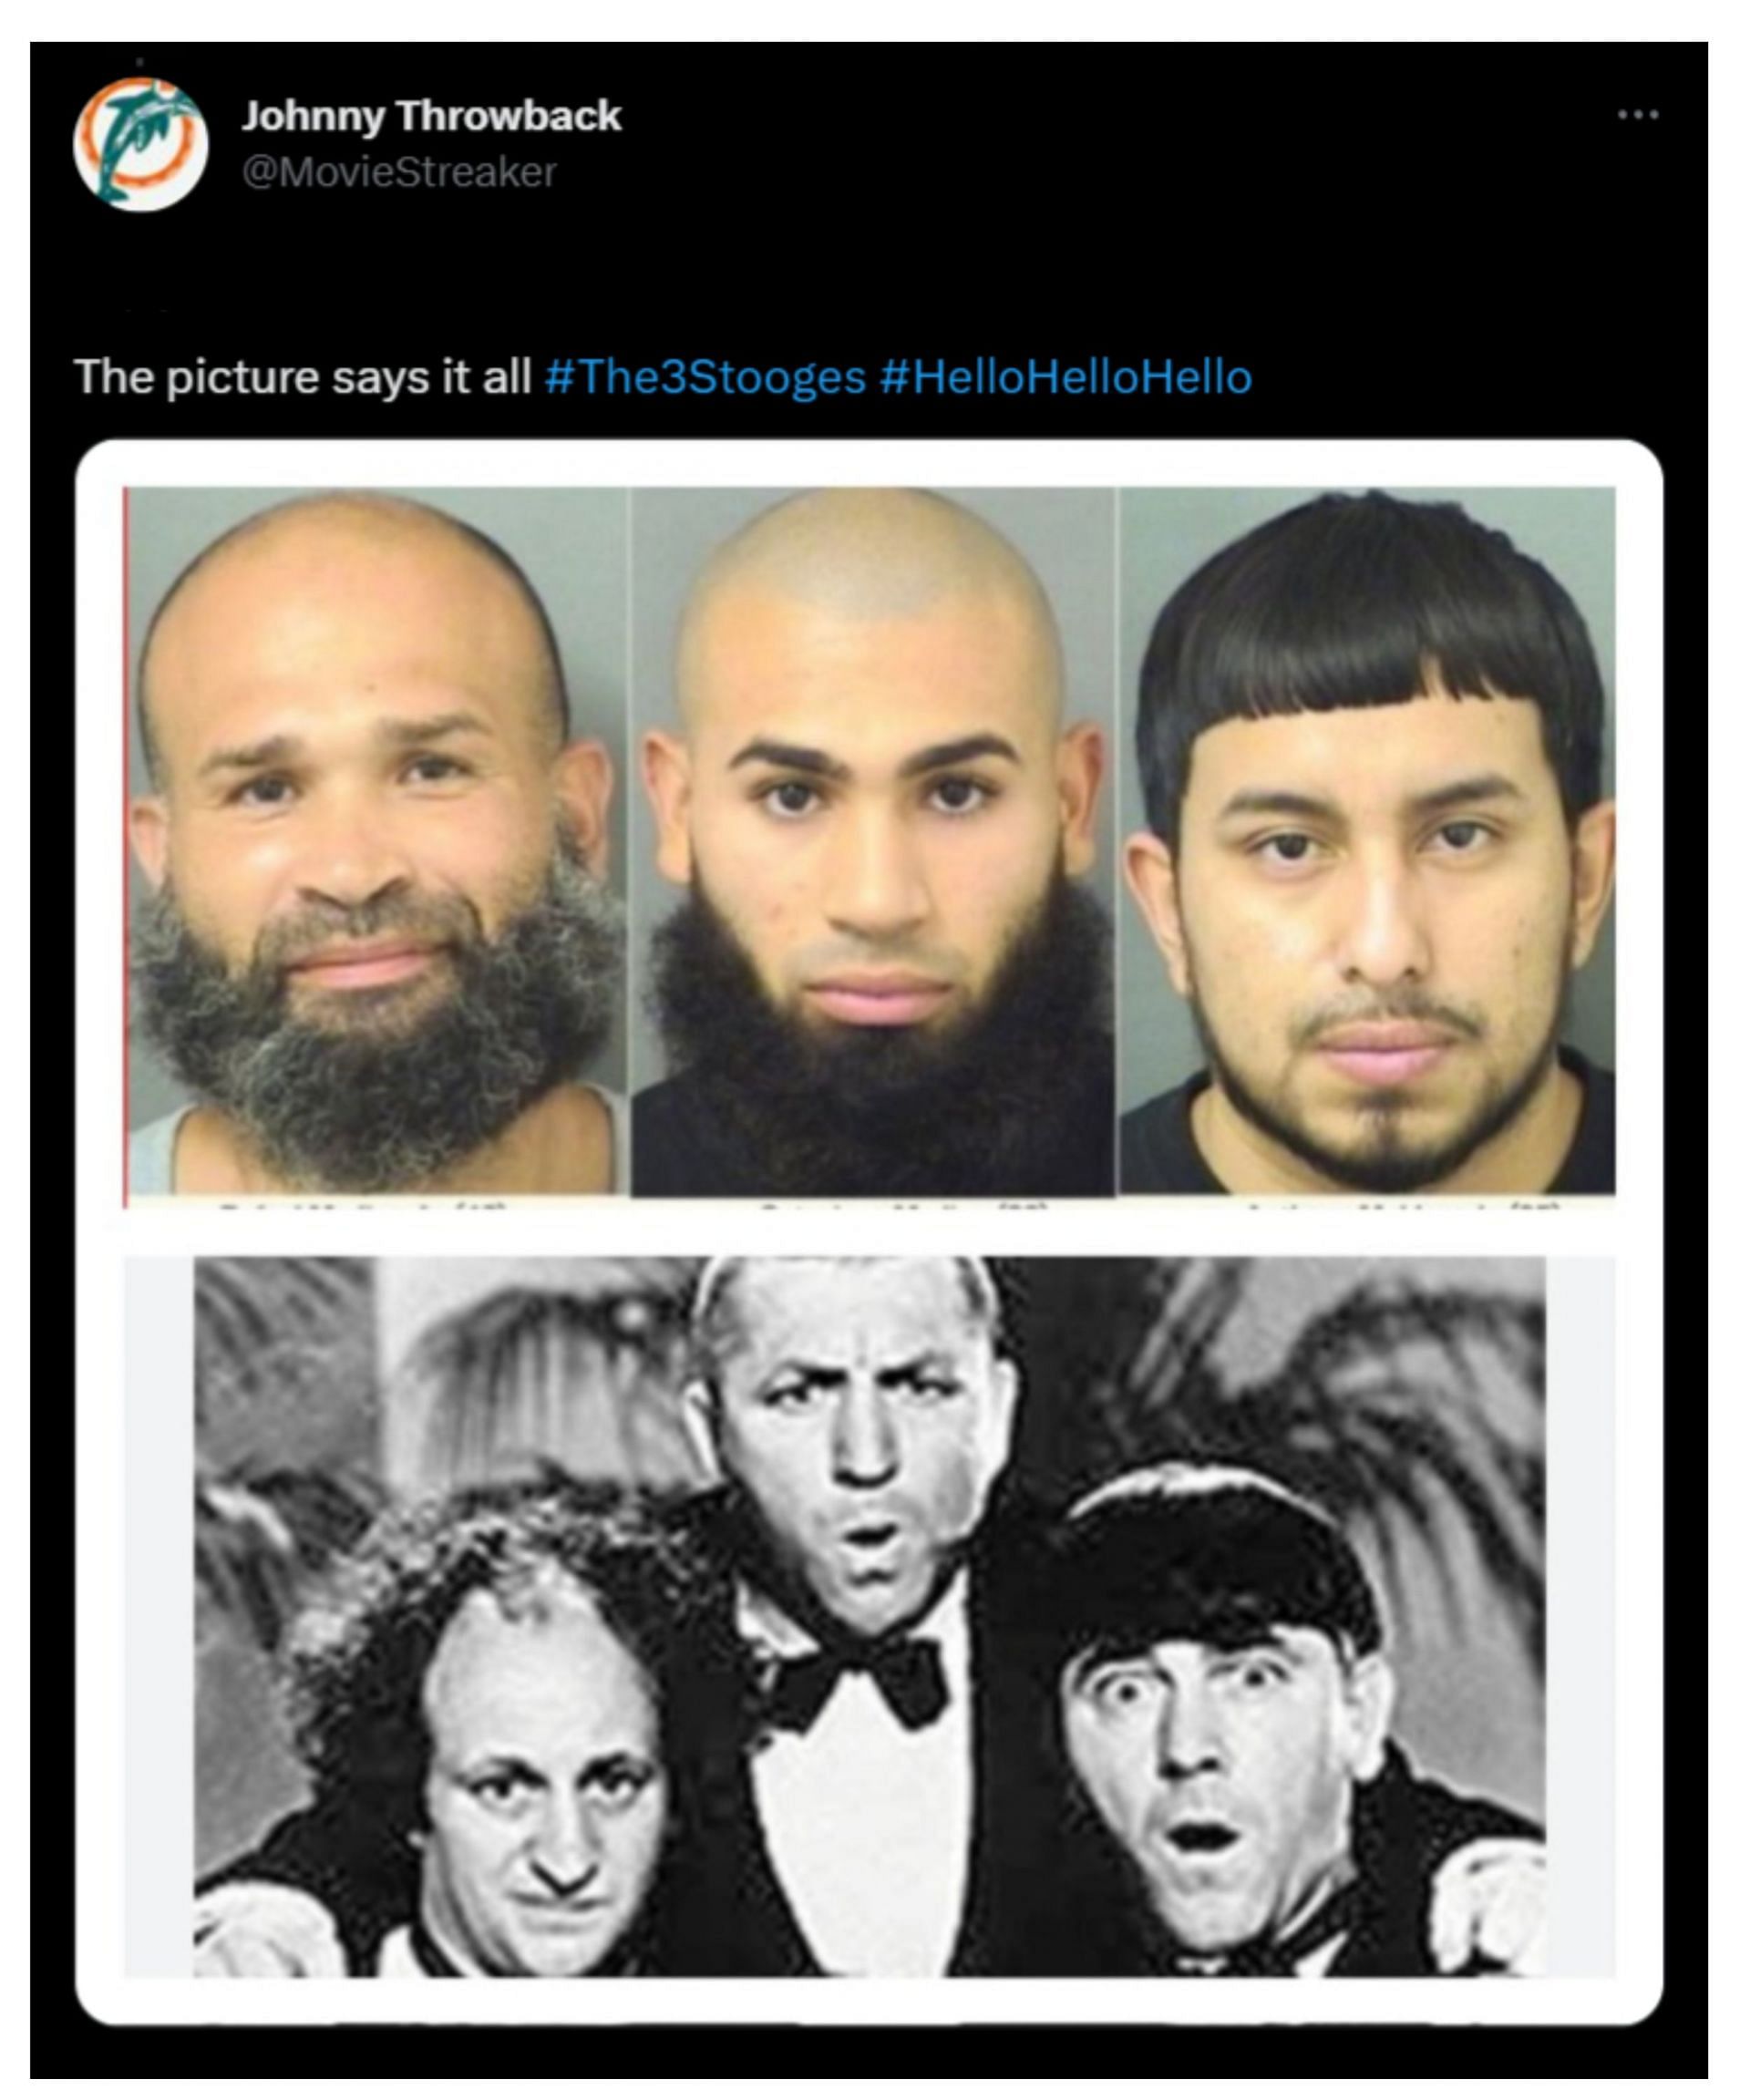 The three stooges compared to the convicts (Image via Twitter/MovieStreaker)